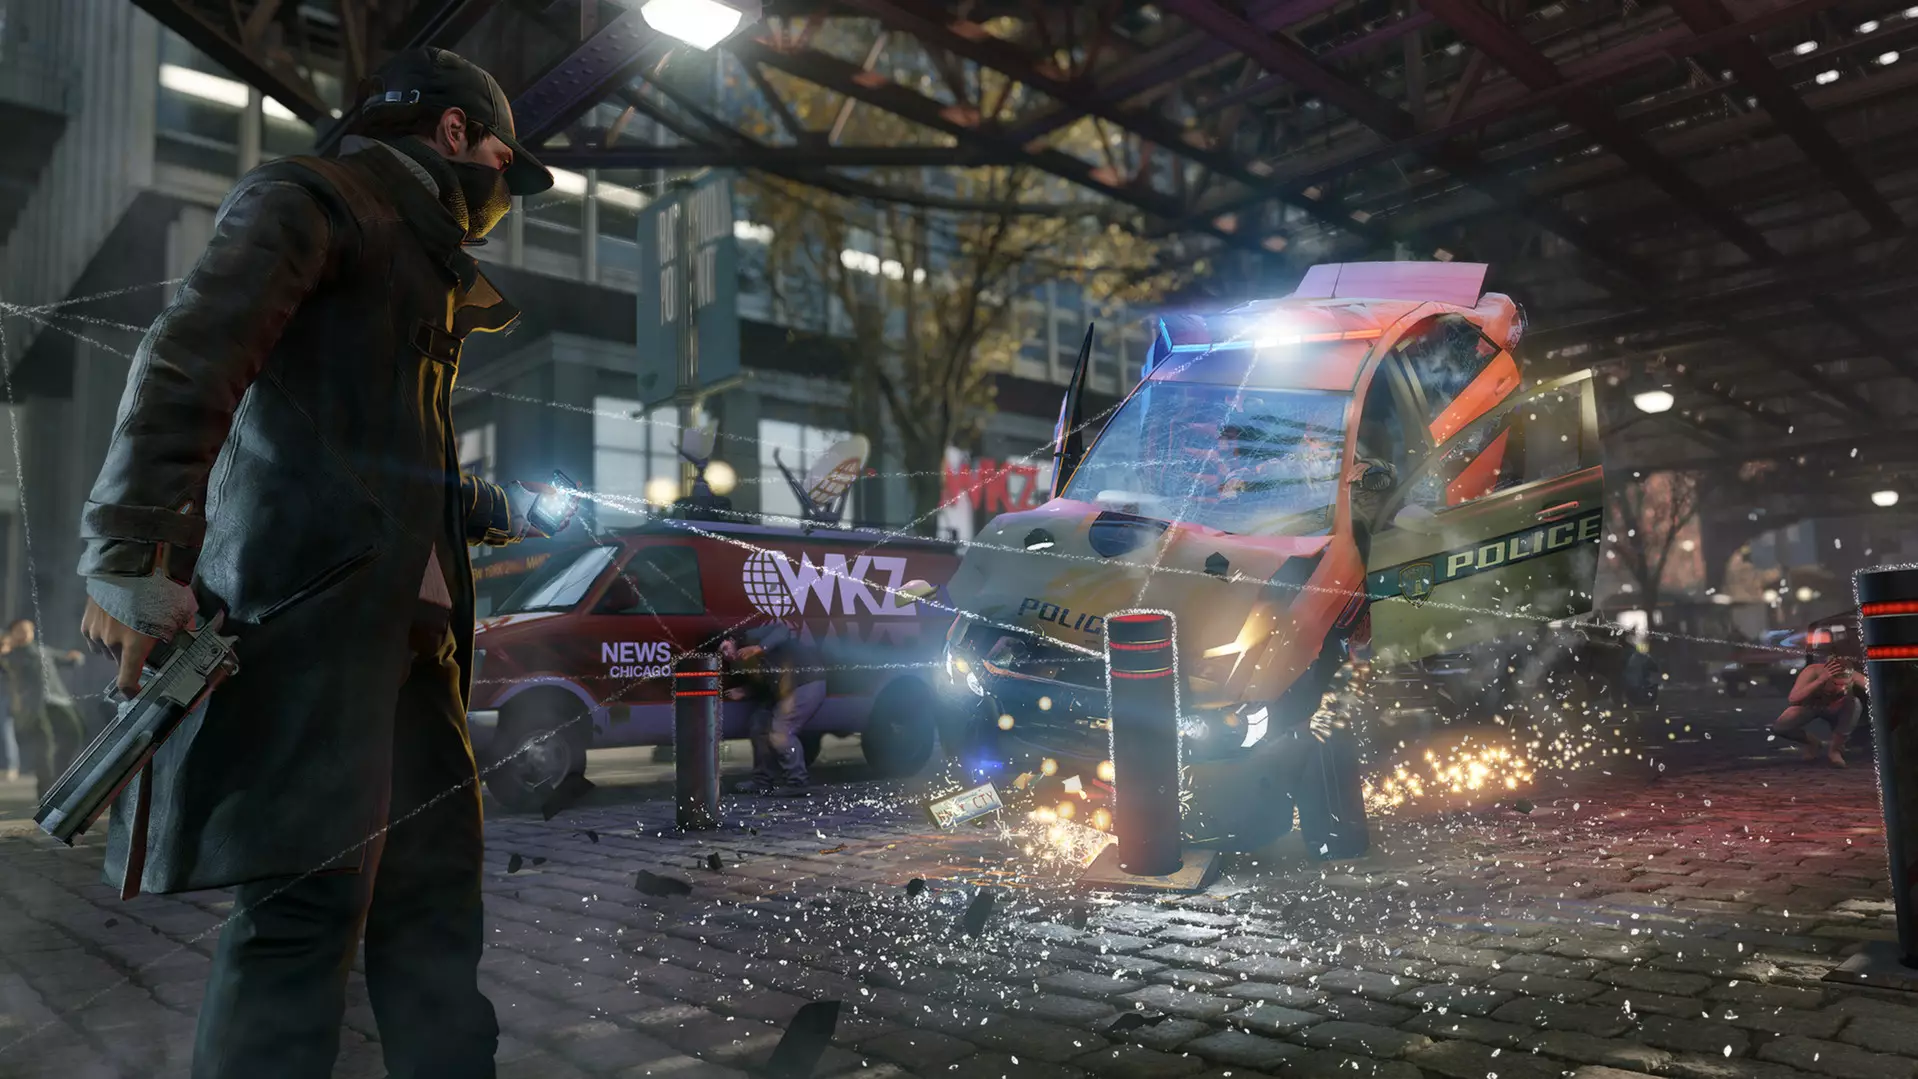 Watch Dogs' Aiden Pearce uses his phone to hack more than other people's information /